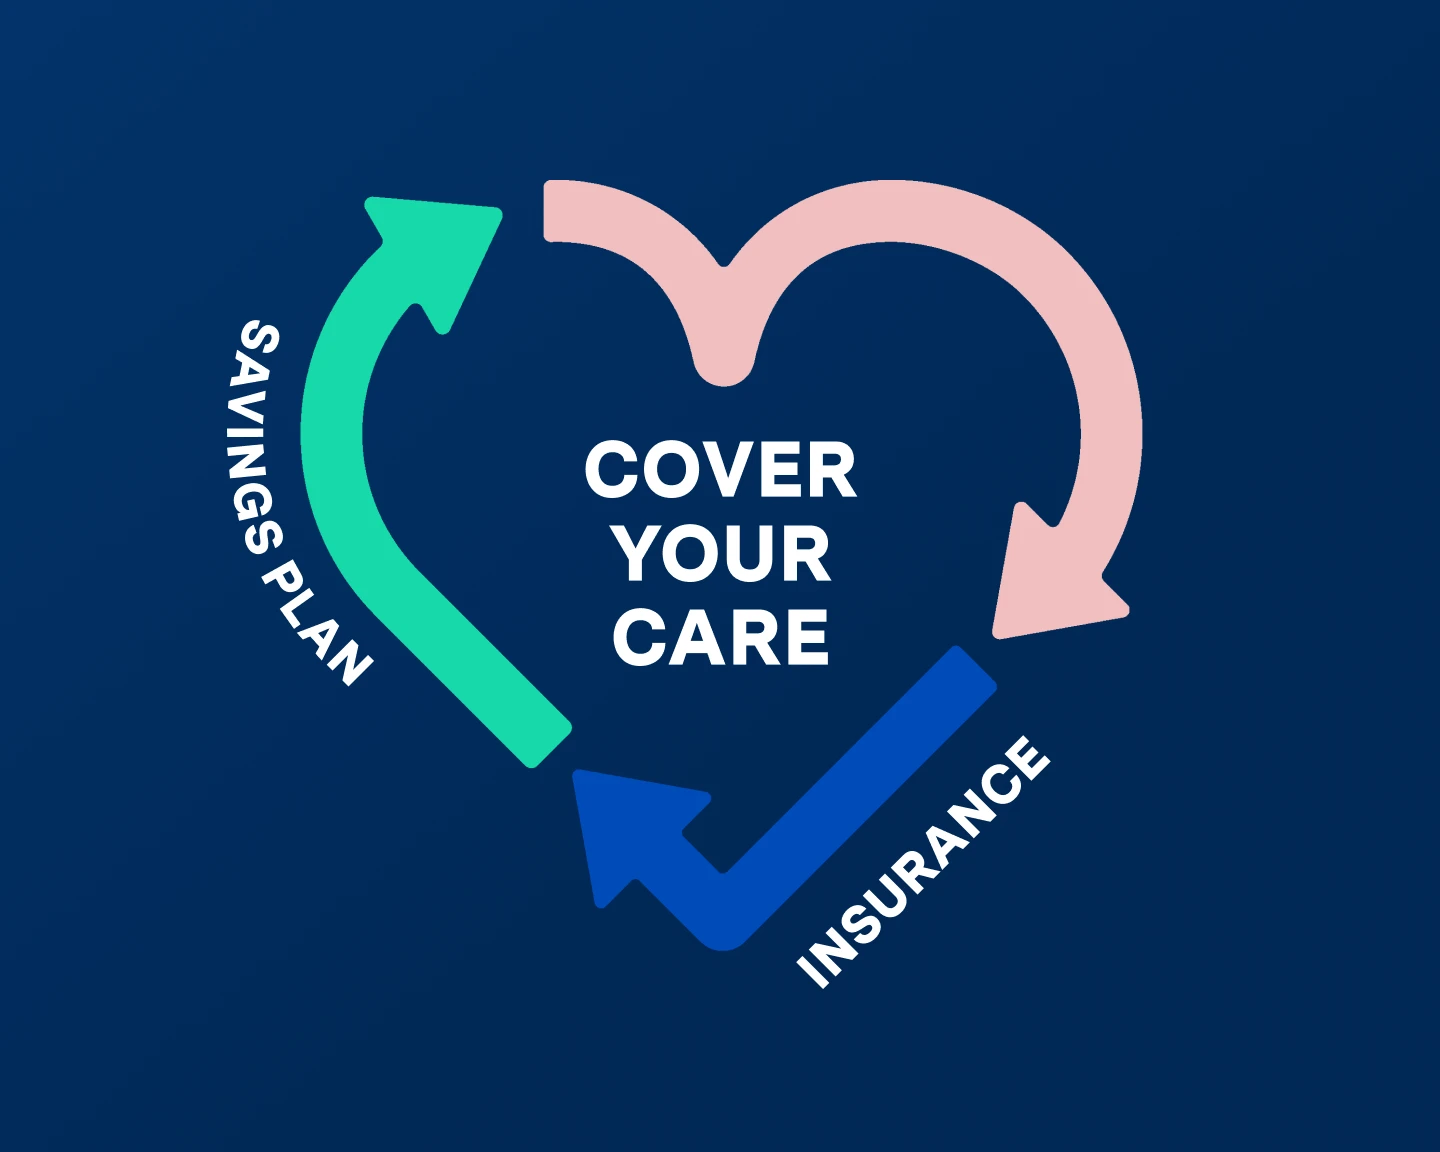 A heart shaped graphic with arrows and the words Cover your care in the center, representing dental financing options available at Aspen Dental link:
Aspen Dental Savings Plan
Dental Insurance